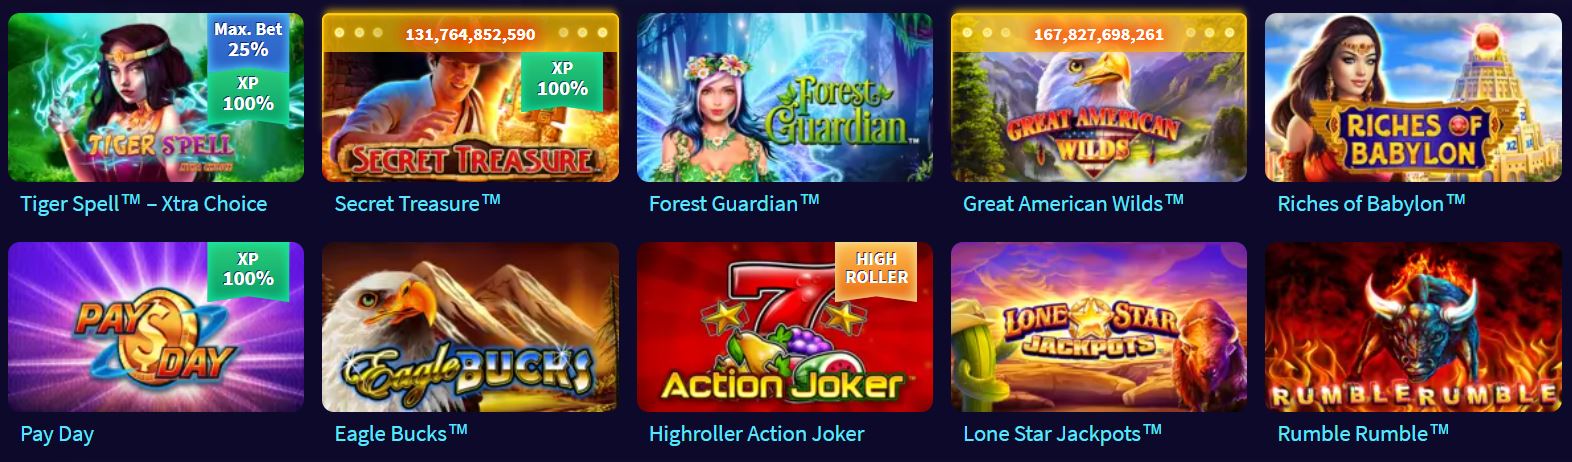 Bonus slots can offer you free spins with money.